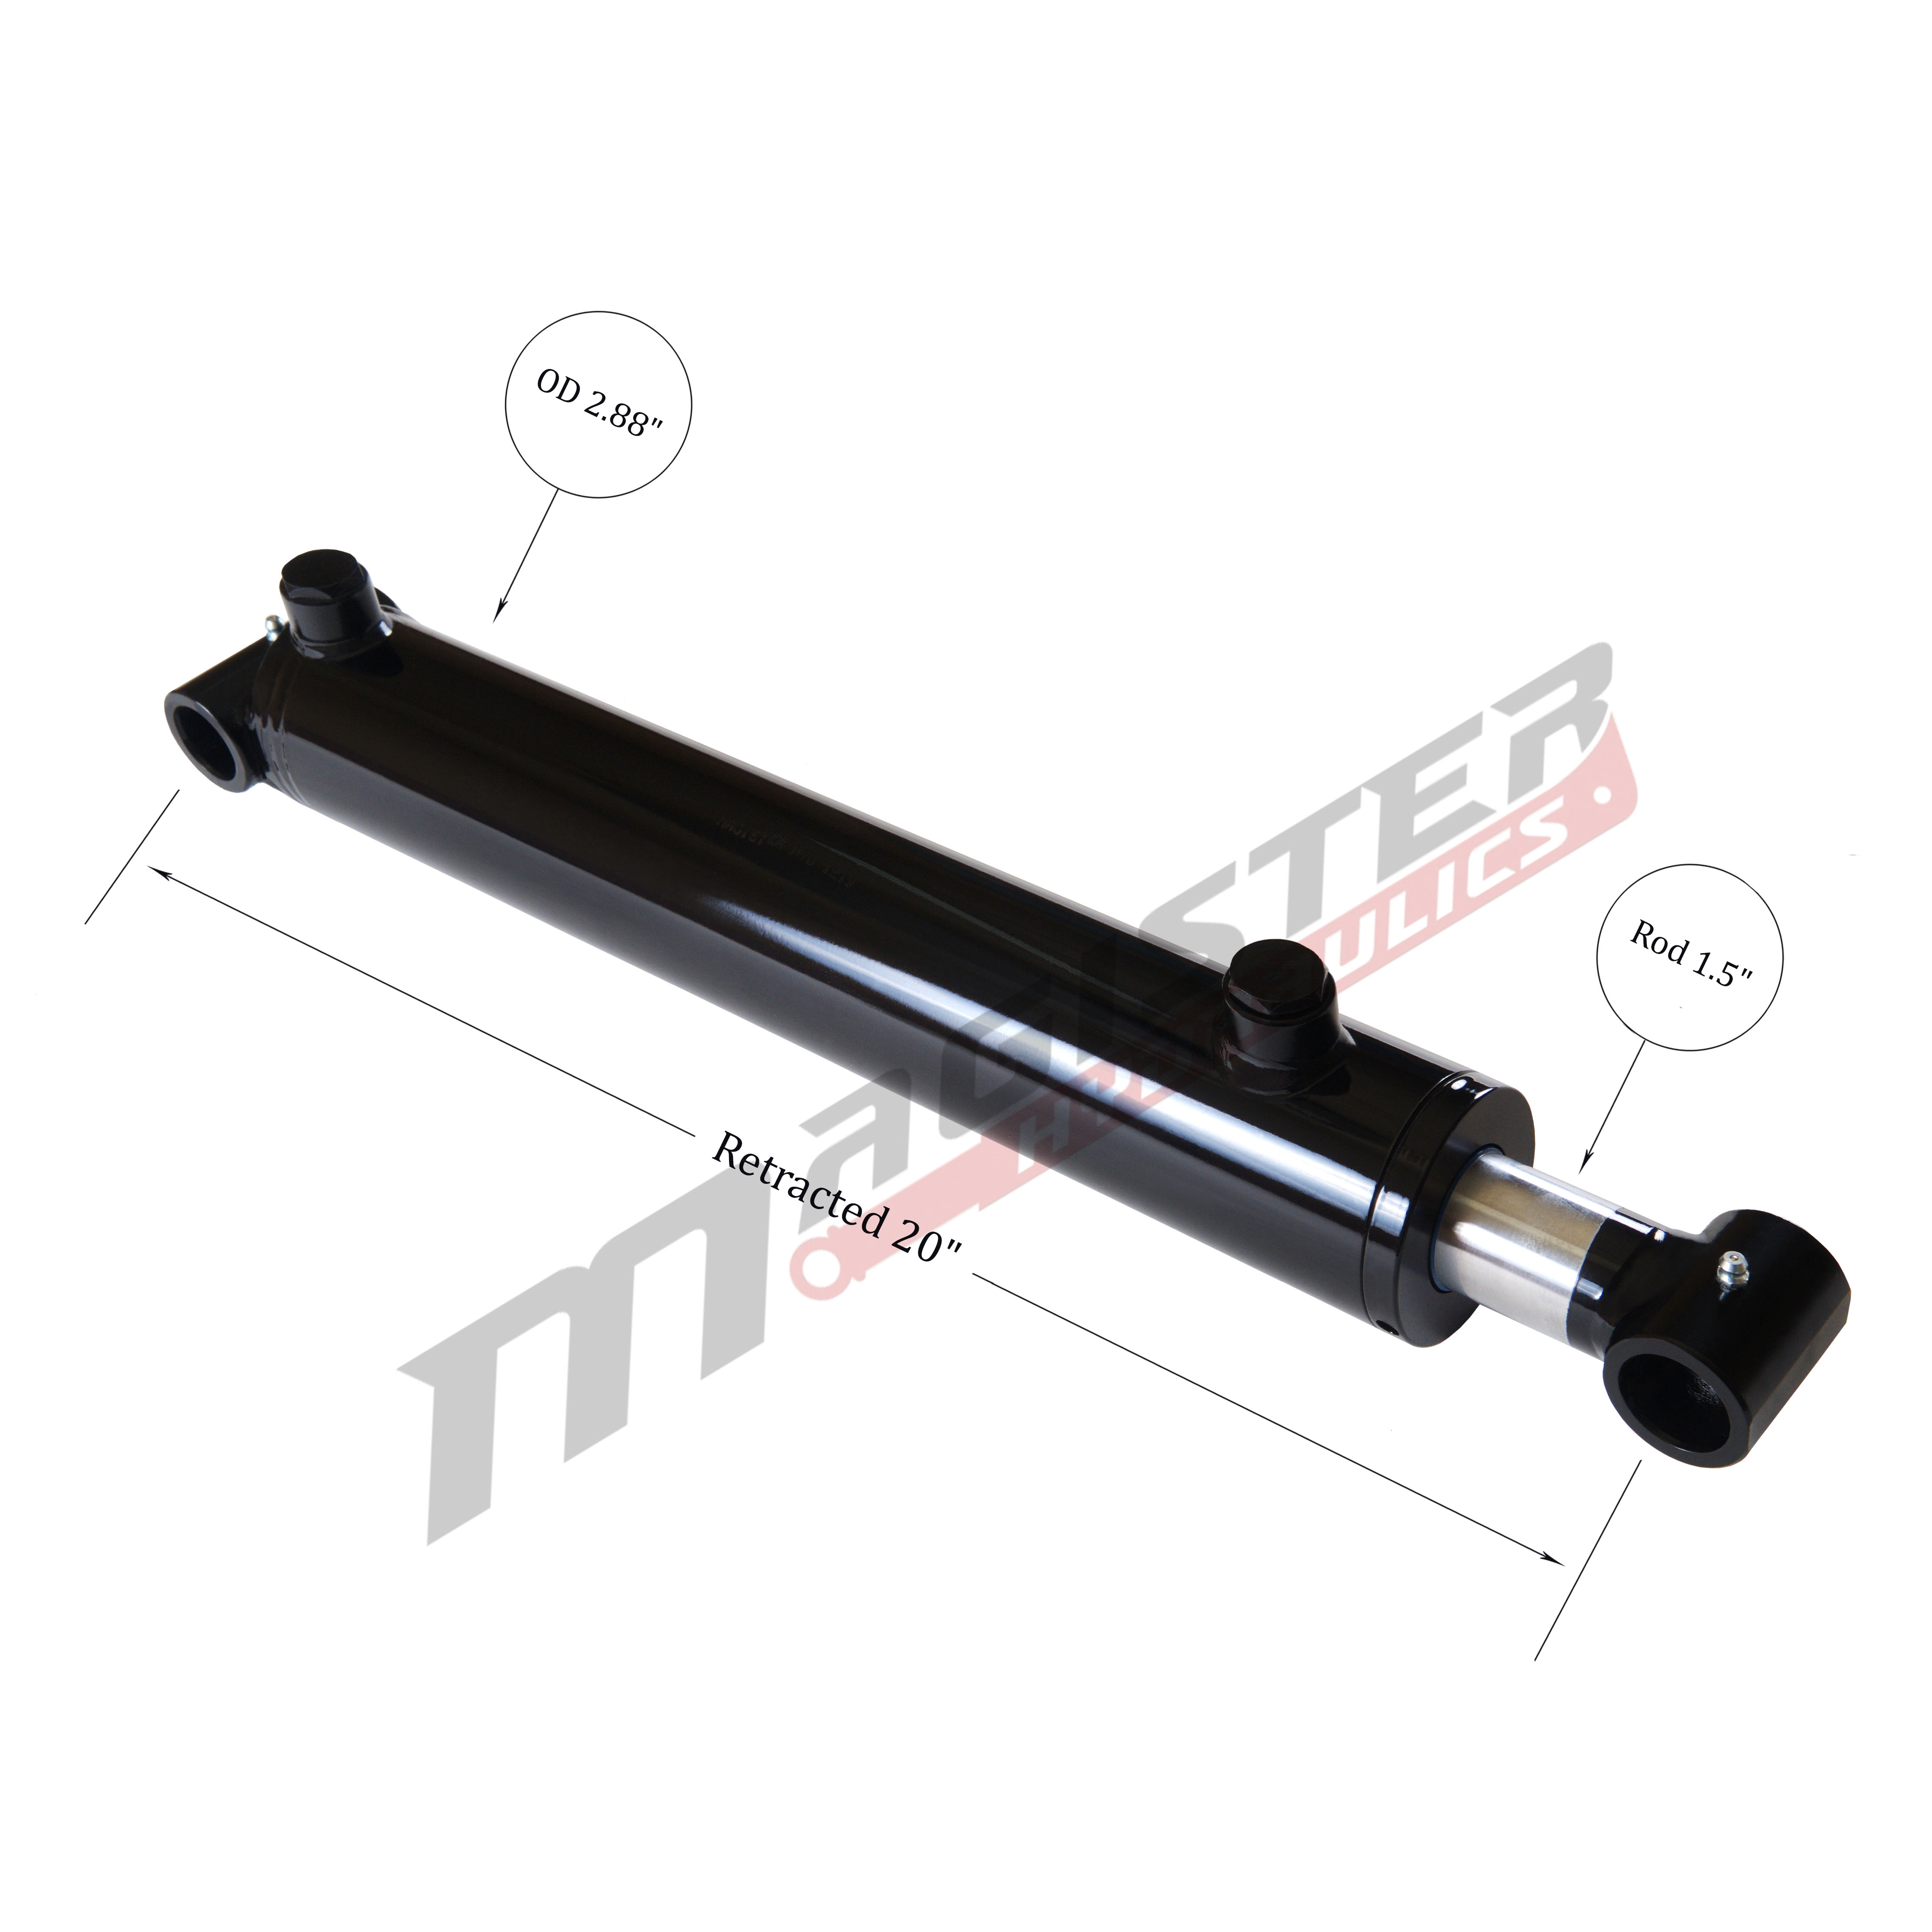 2.5 bore x 12 stroke hydraulic cylinder, welded cross tube double acting cylinder | Magister Hydraulics